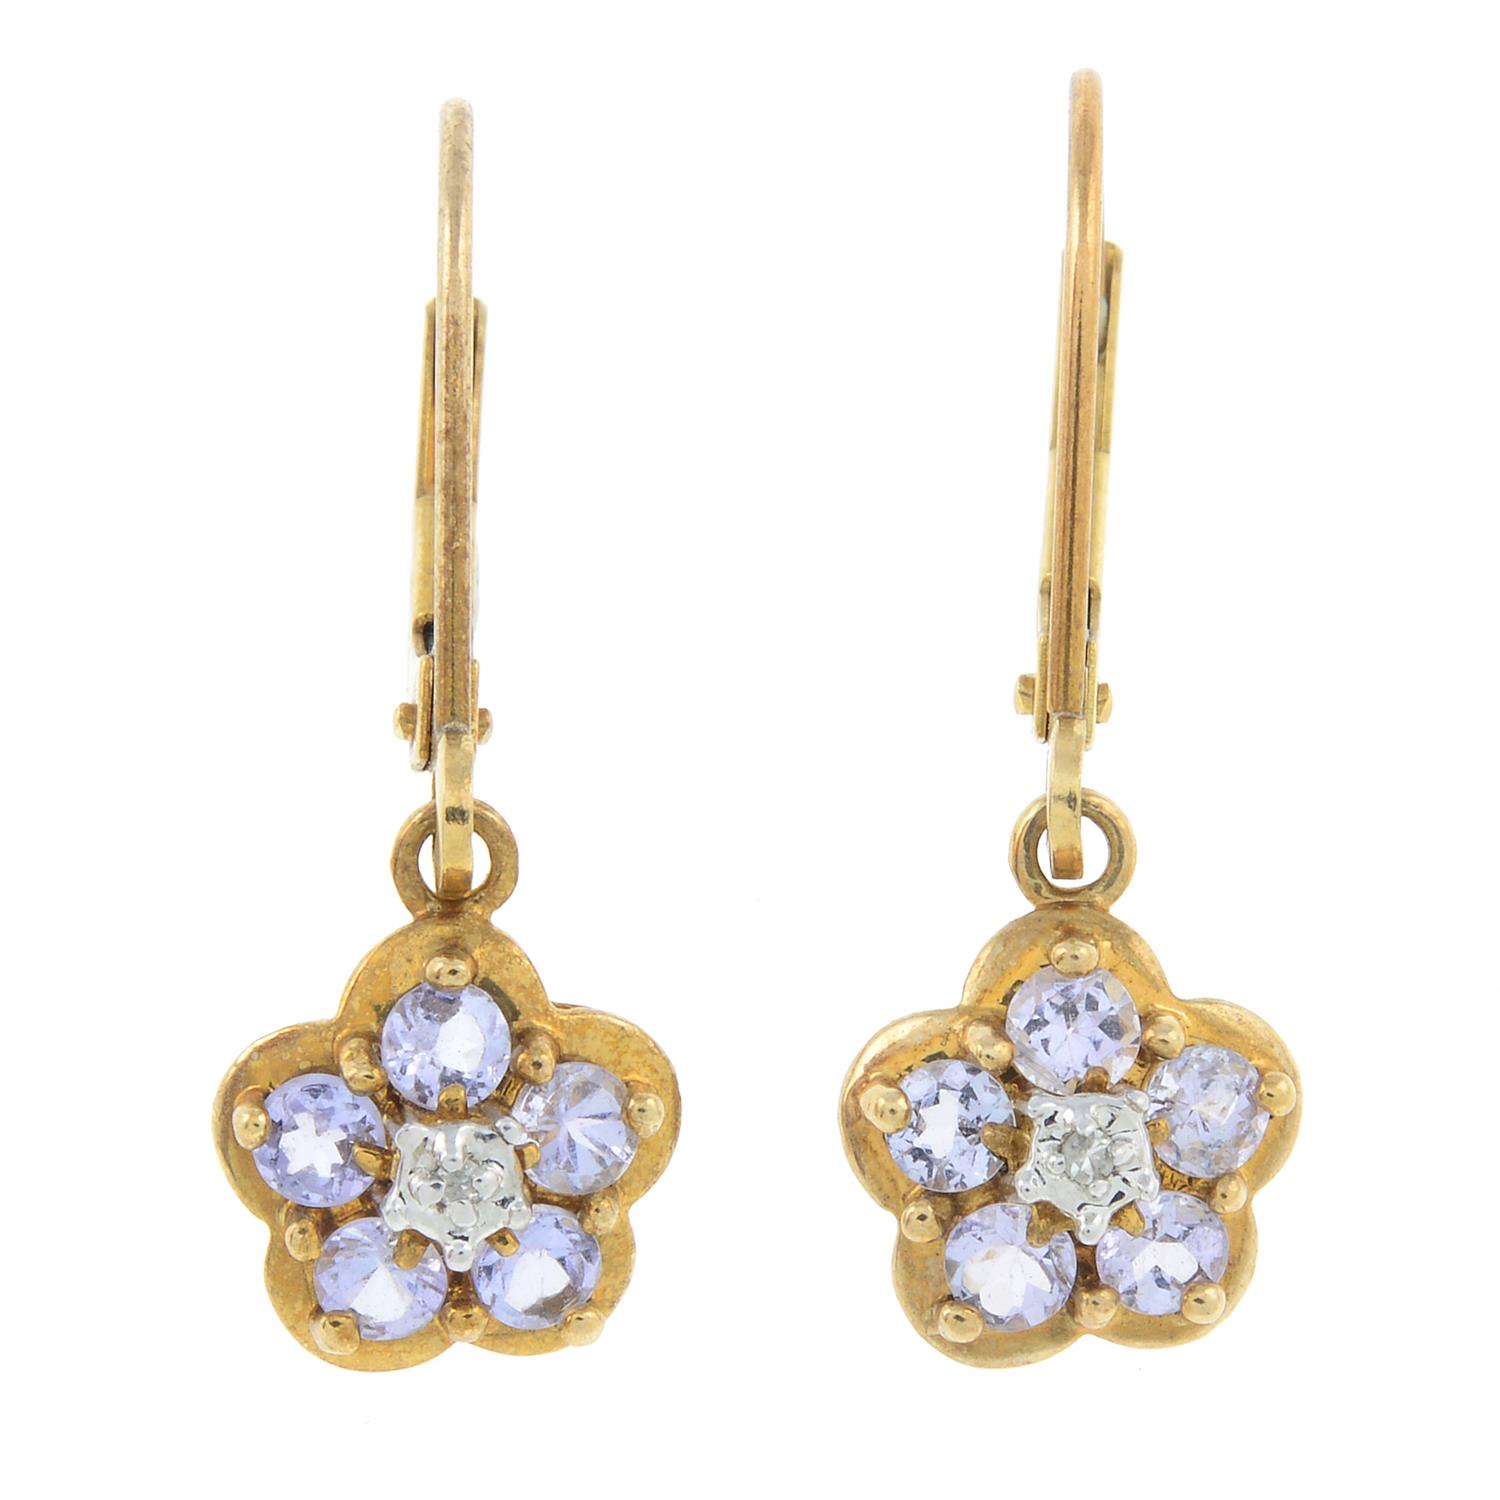 A pair of iolite and diamond floral drop earrings.